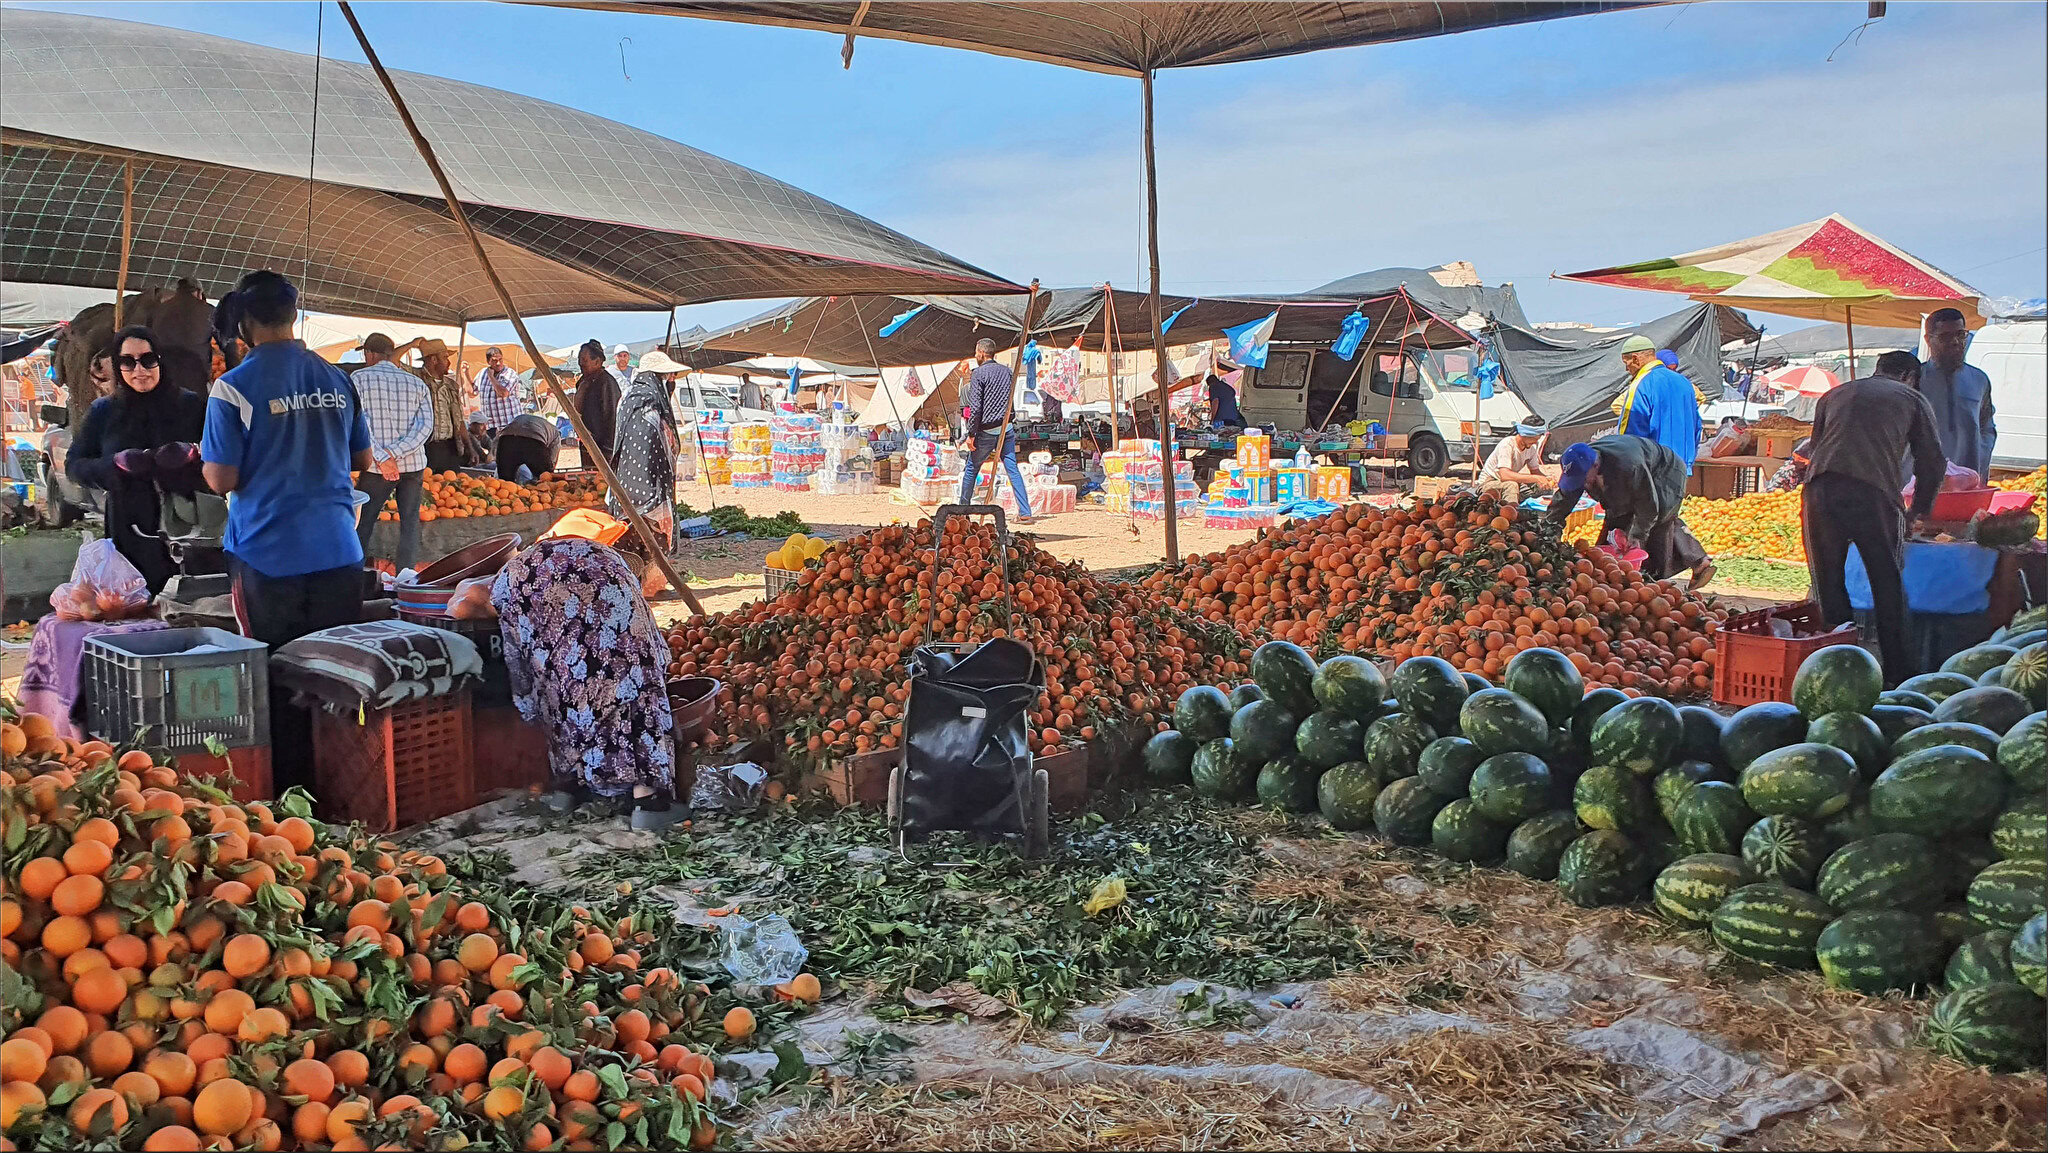 Mountains of fruit at a market in Sidi Ifni.